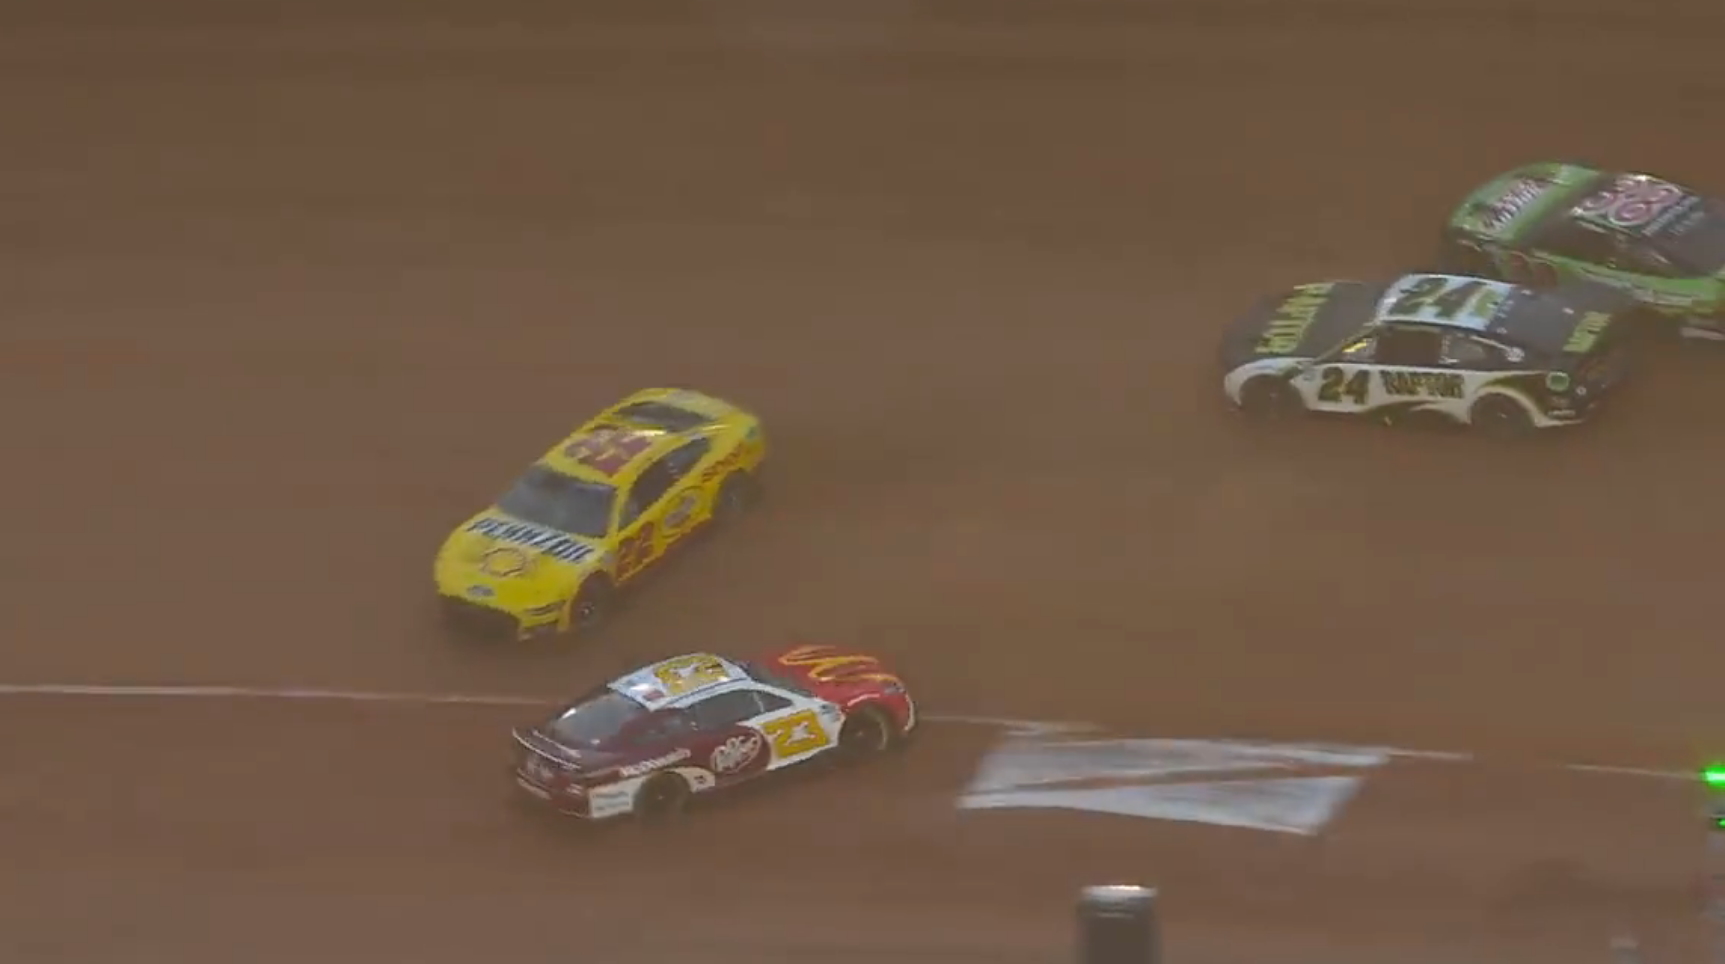 Joey Logano Bubba Wallace spin William Byron 2023 Food City Dirt Race video highlight